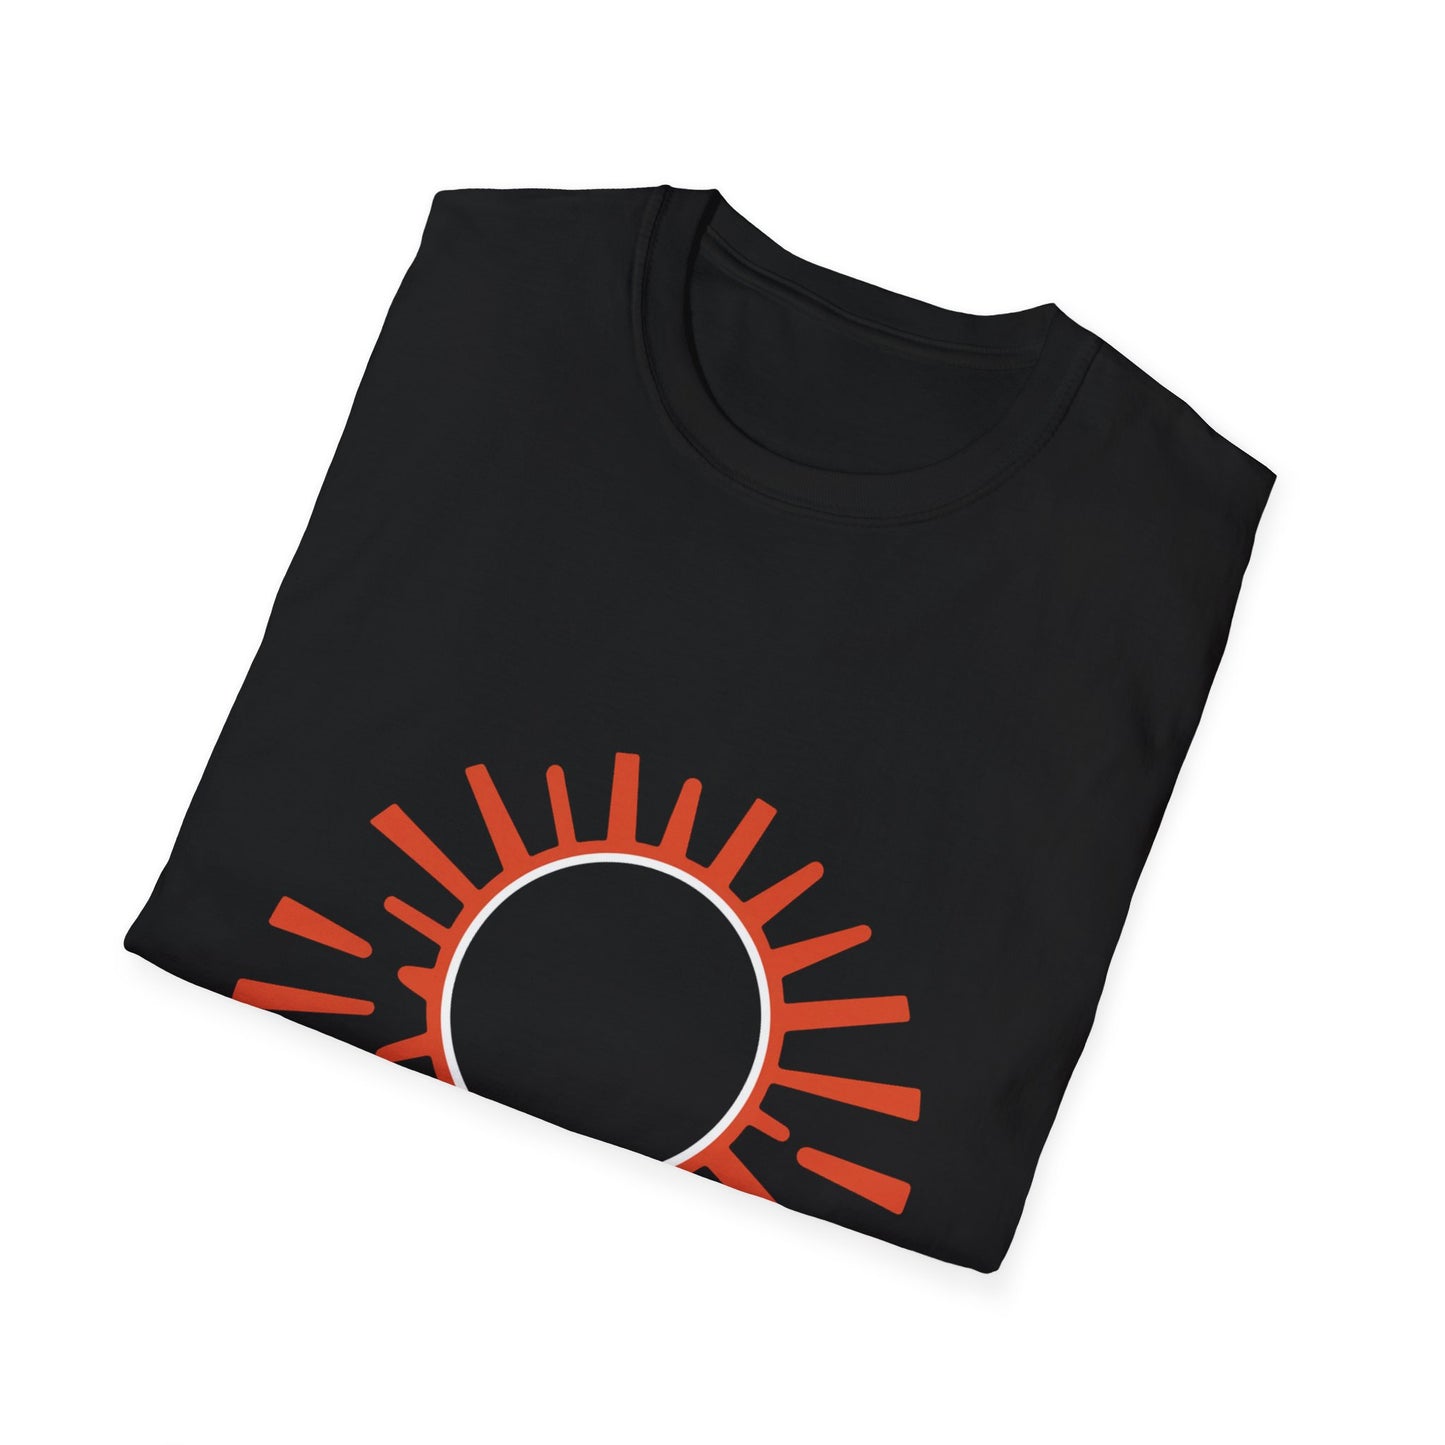 Erie Eclipse Black Tee, Unisex Softstyle Tee, Stylish Graphic T-Shirt, Trendy Top